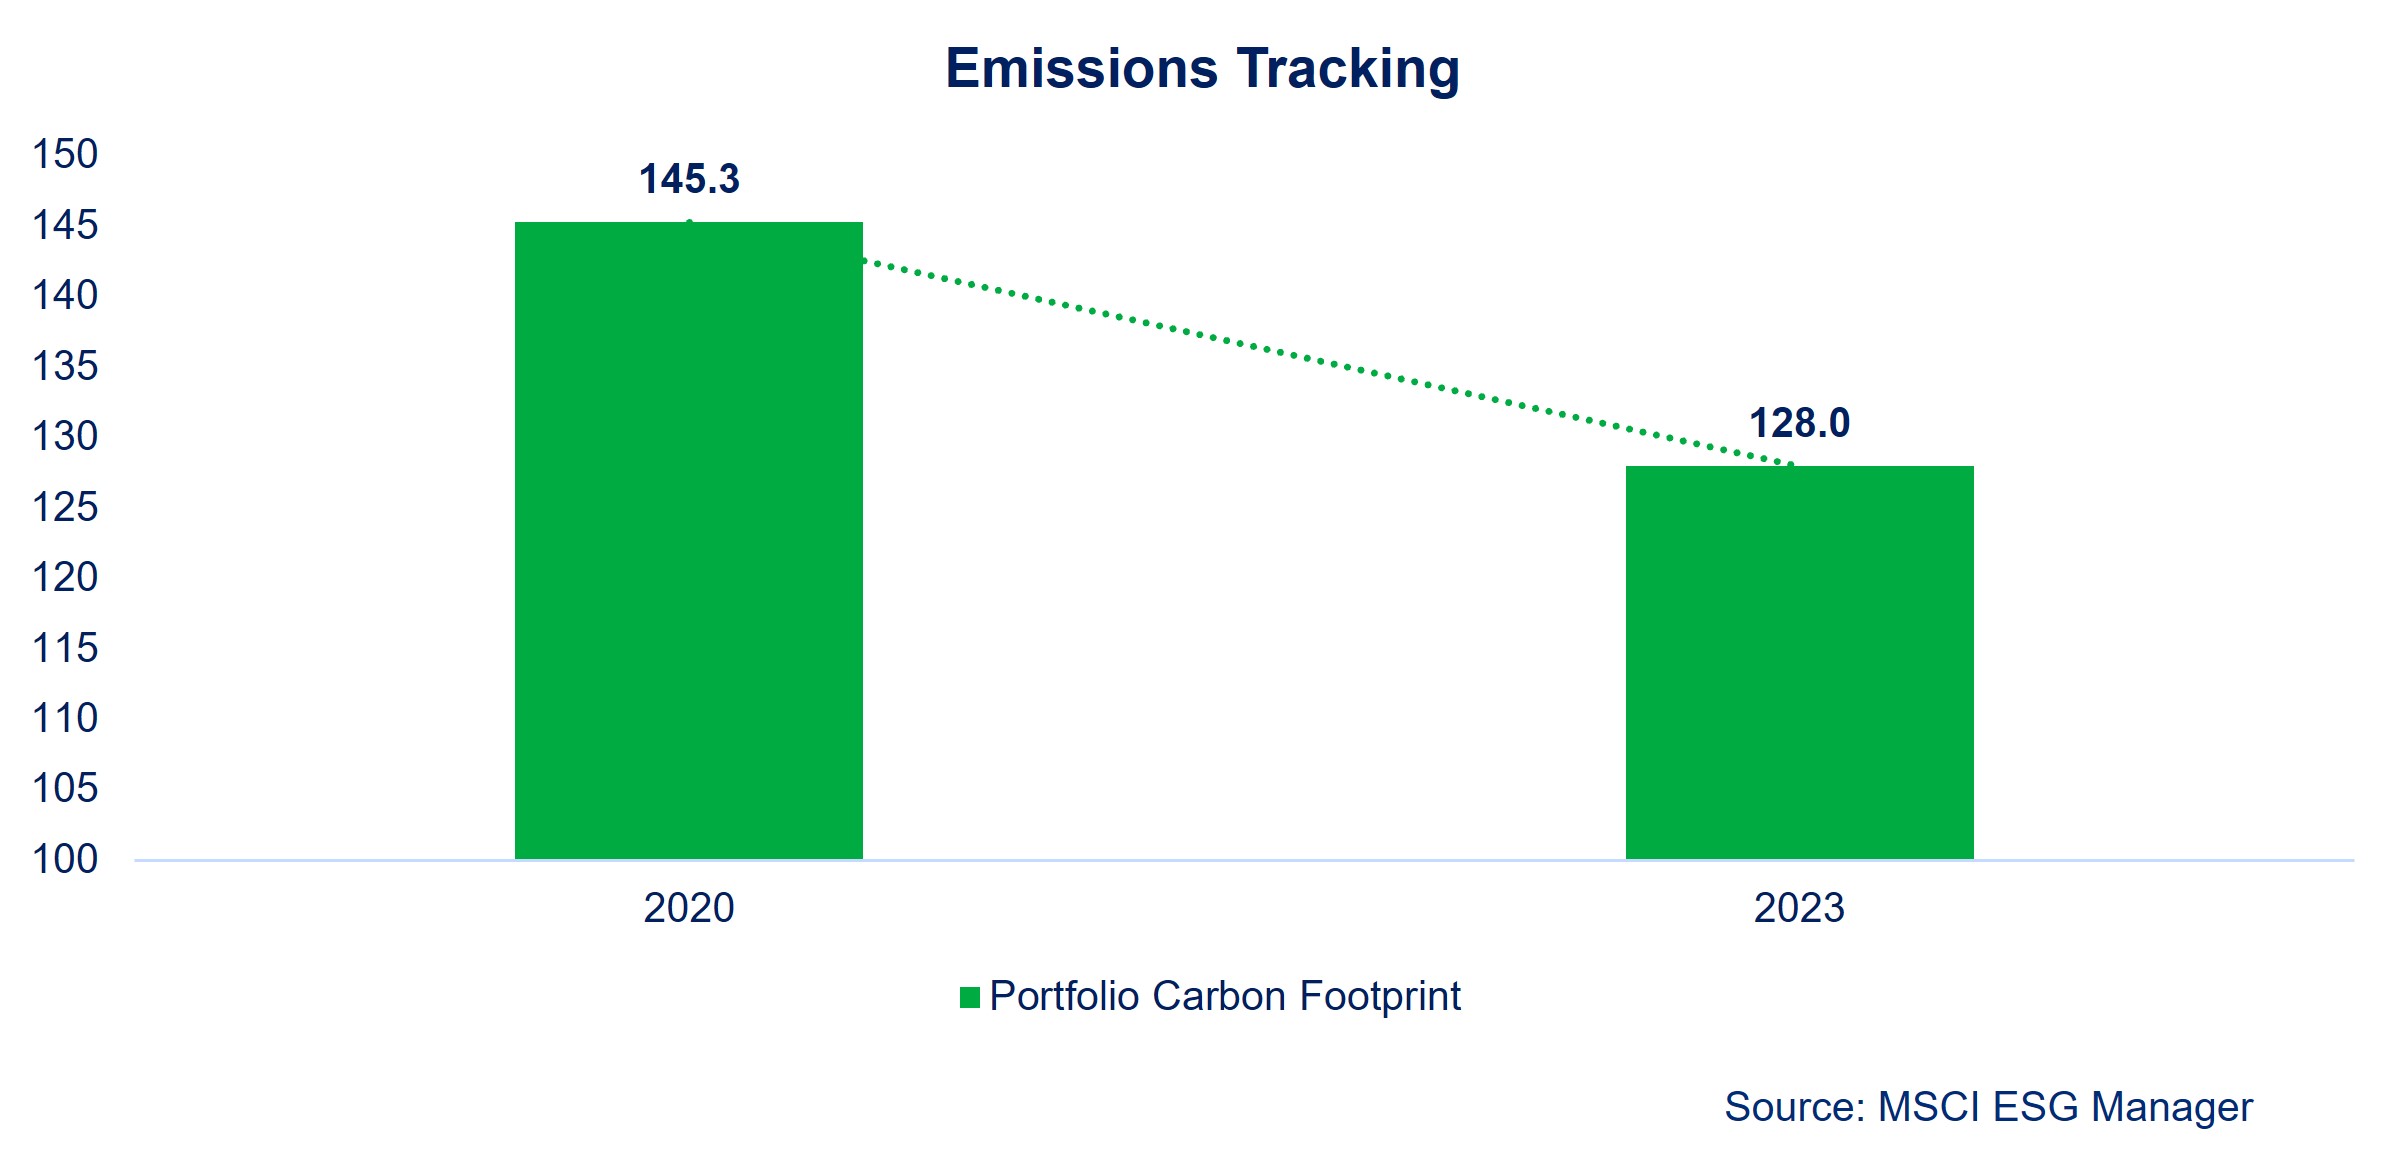 Image of a graph showing a decrease in the portfolio carbon footprint from 145.3 in 2020 to 128.0 in 2023